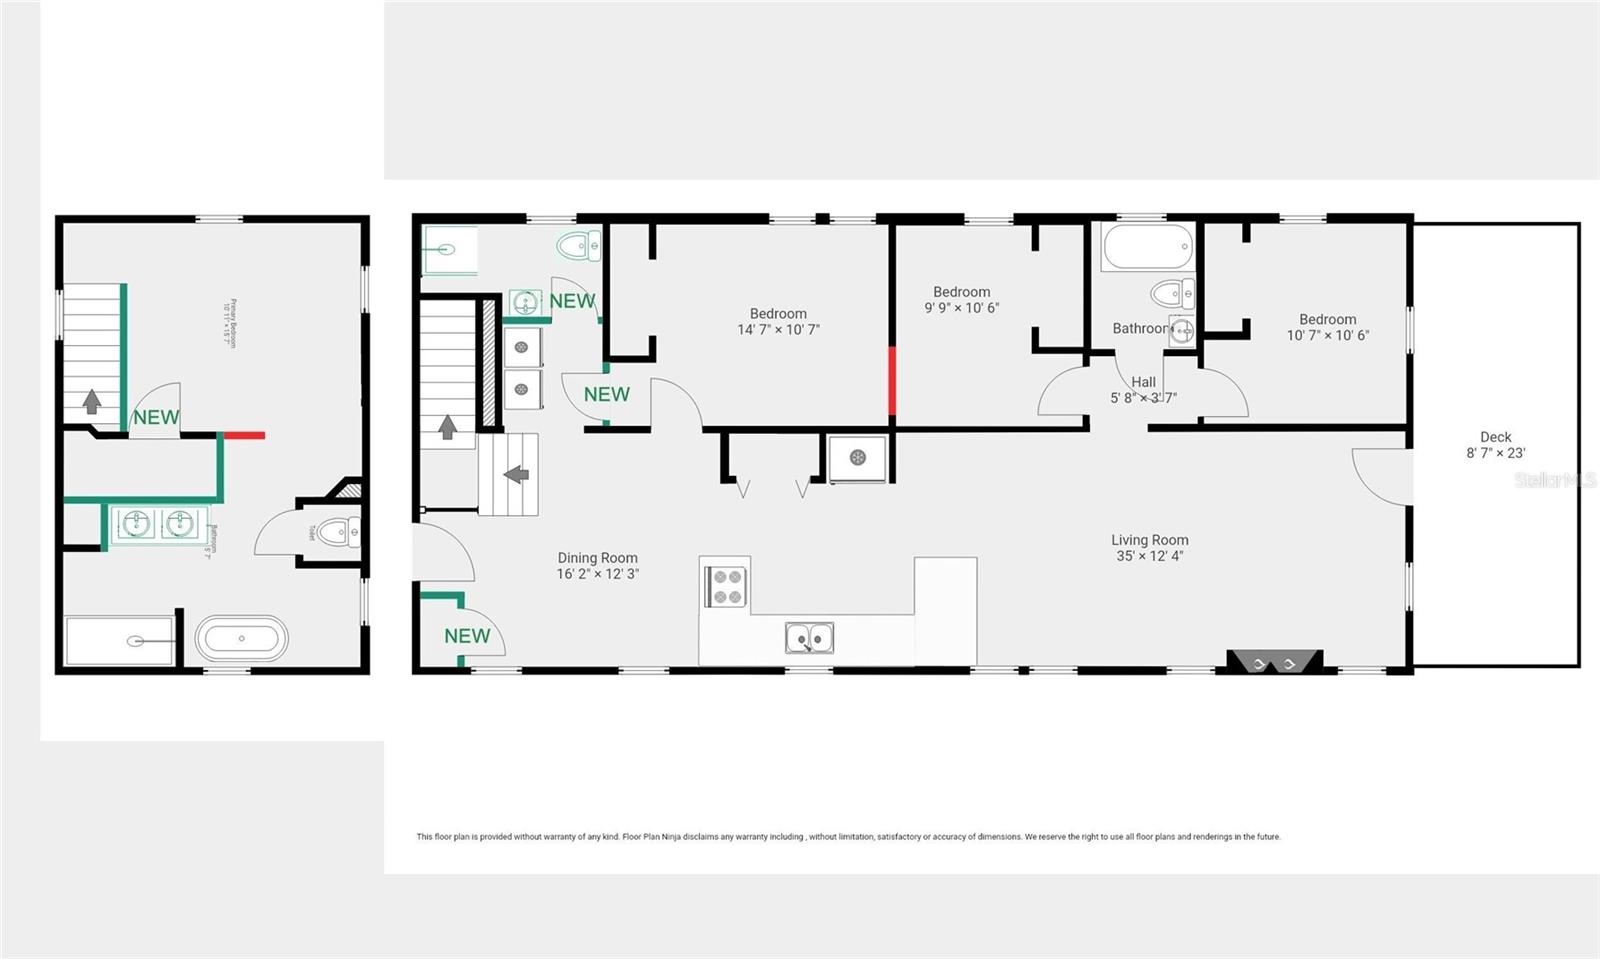 Floor plans showing the layout and approximate room sizes.